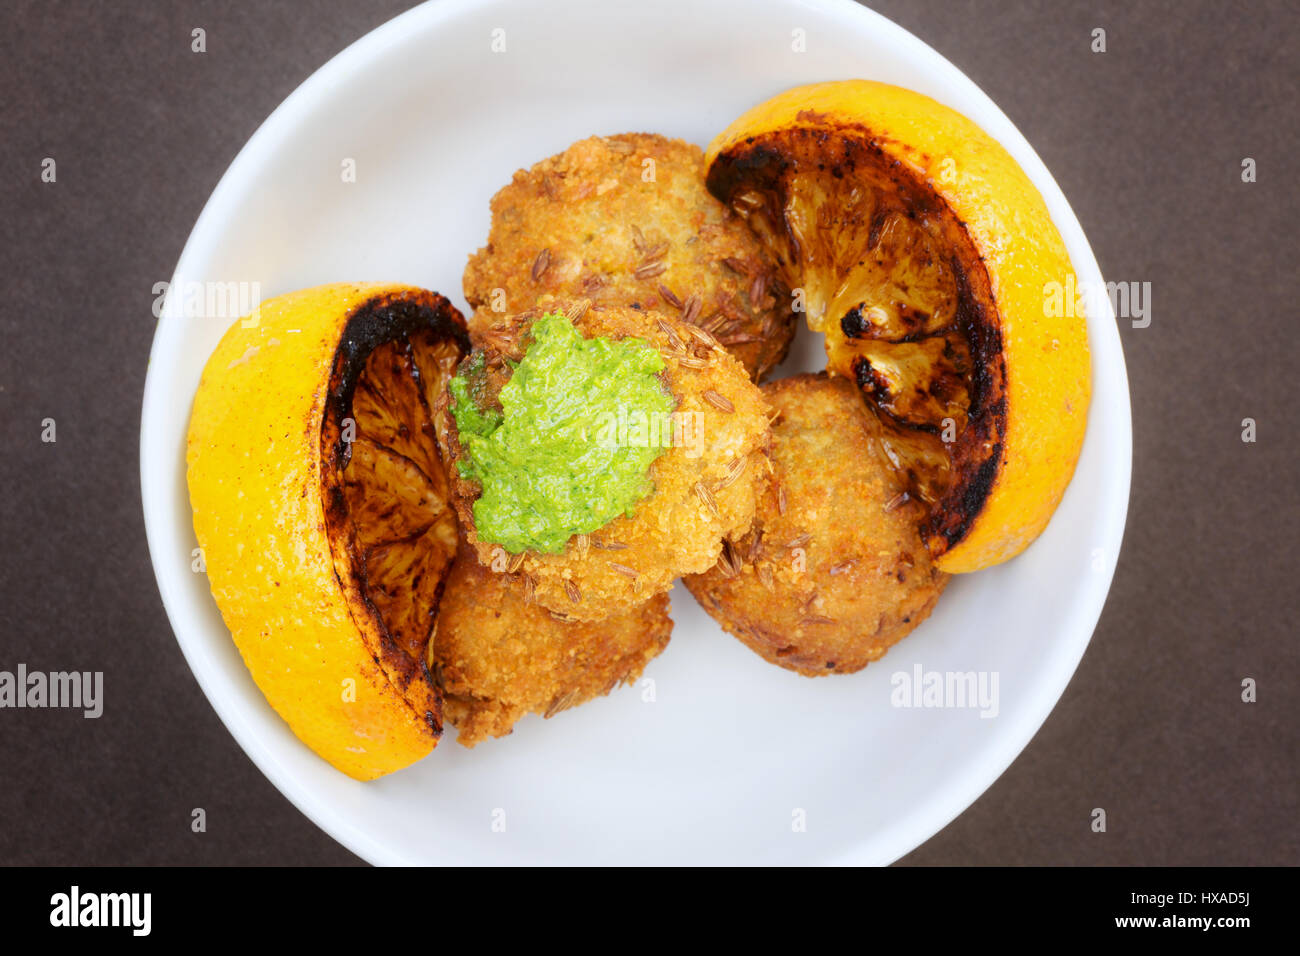 Healthy food - Butternut squash fritters with lemon and zough, example of vegetarian food and Vegan food, UK Stock Photo